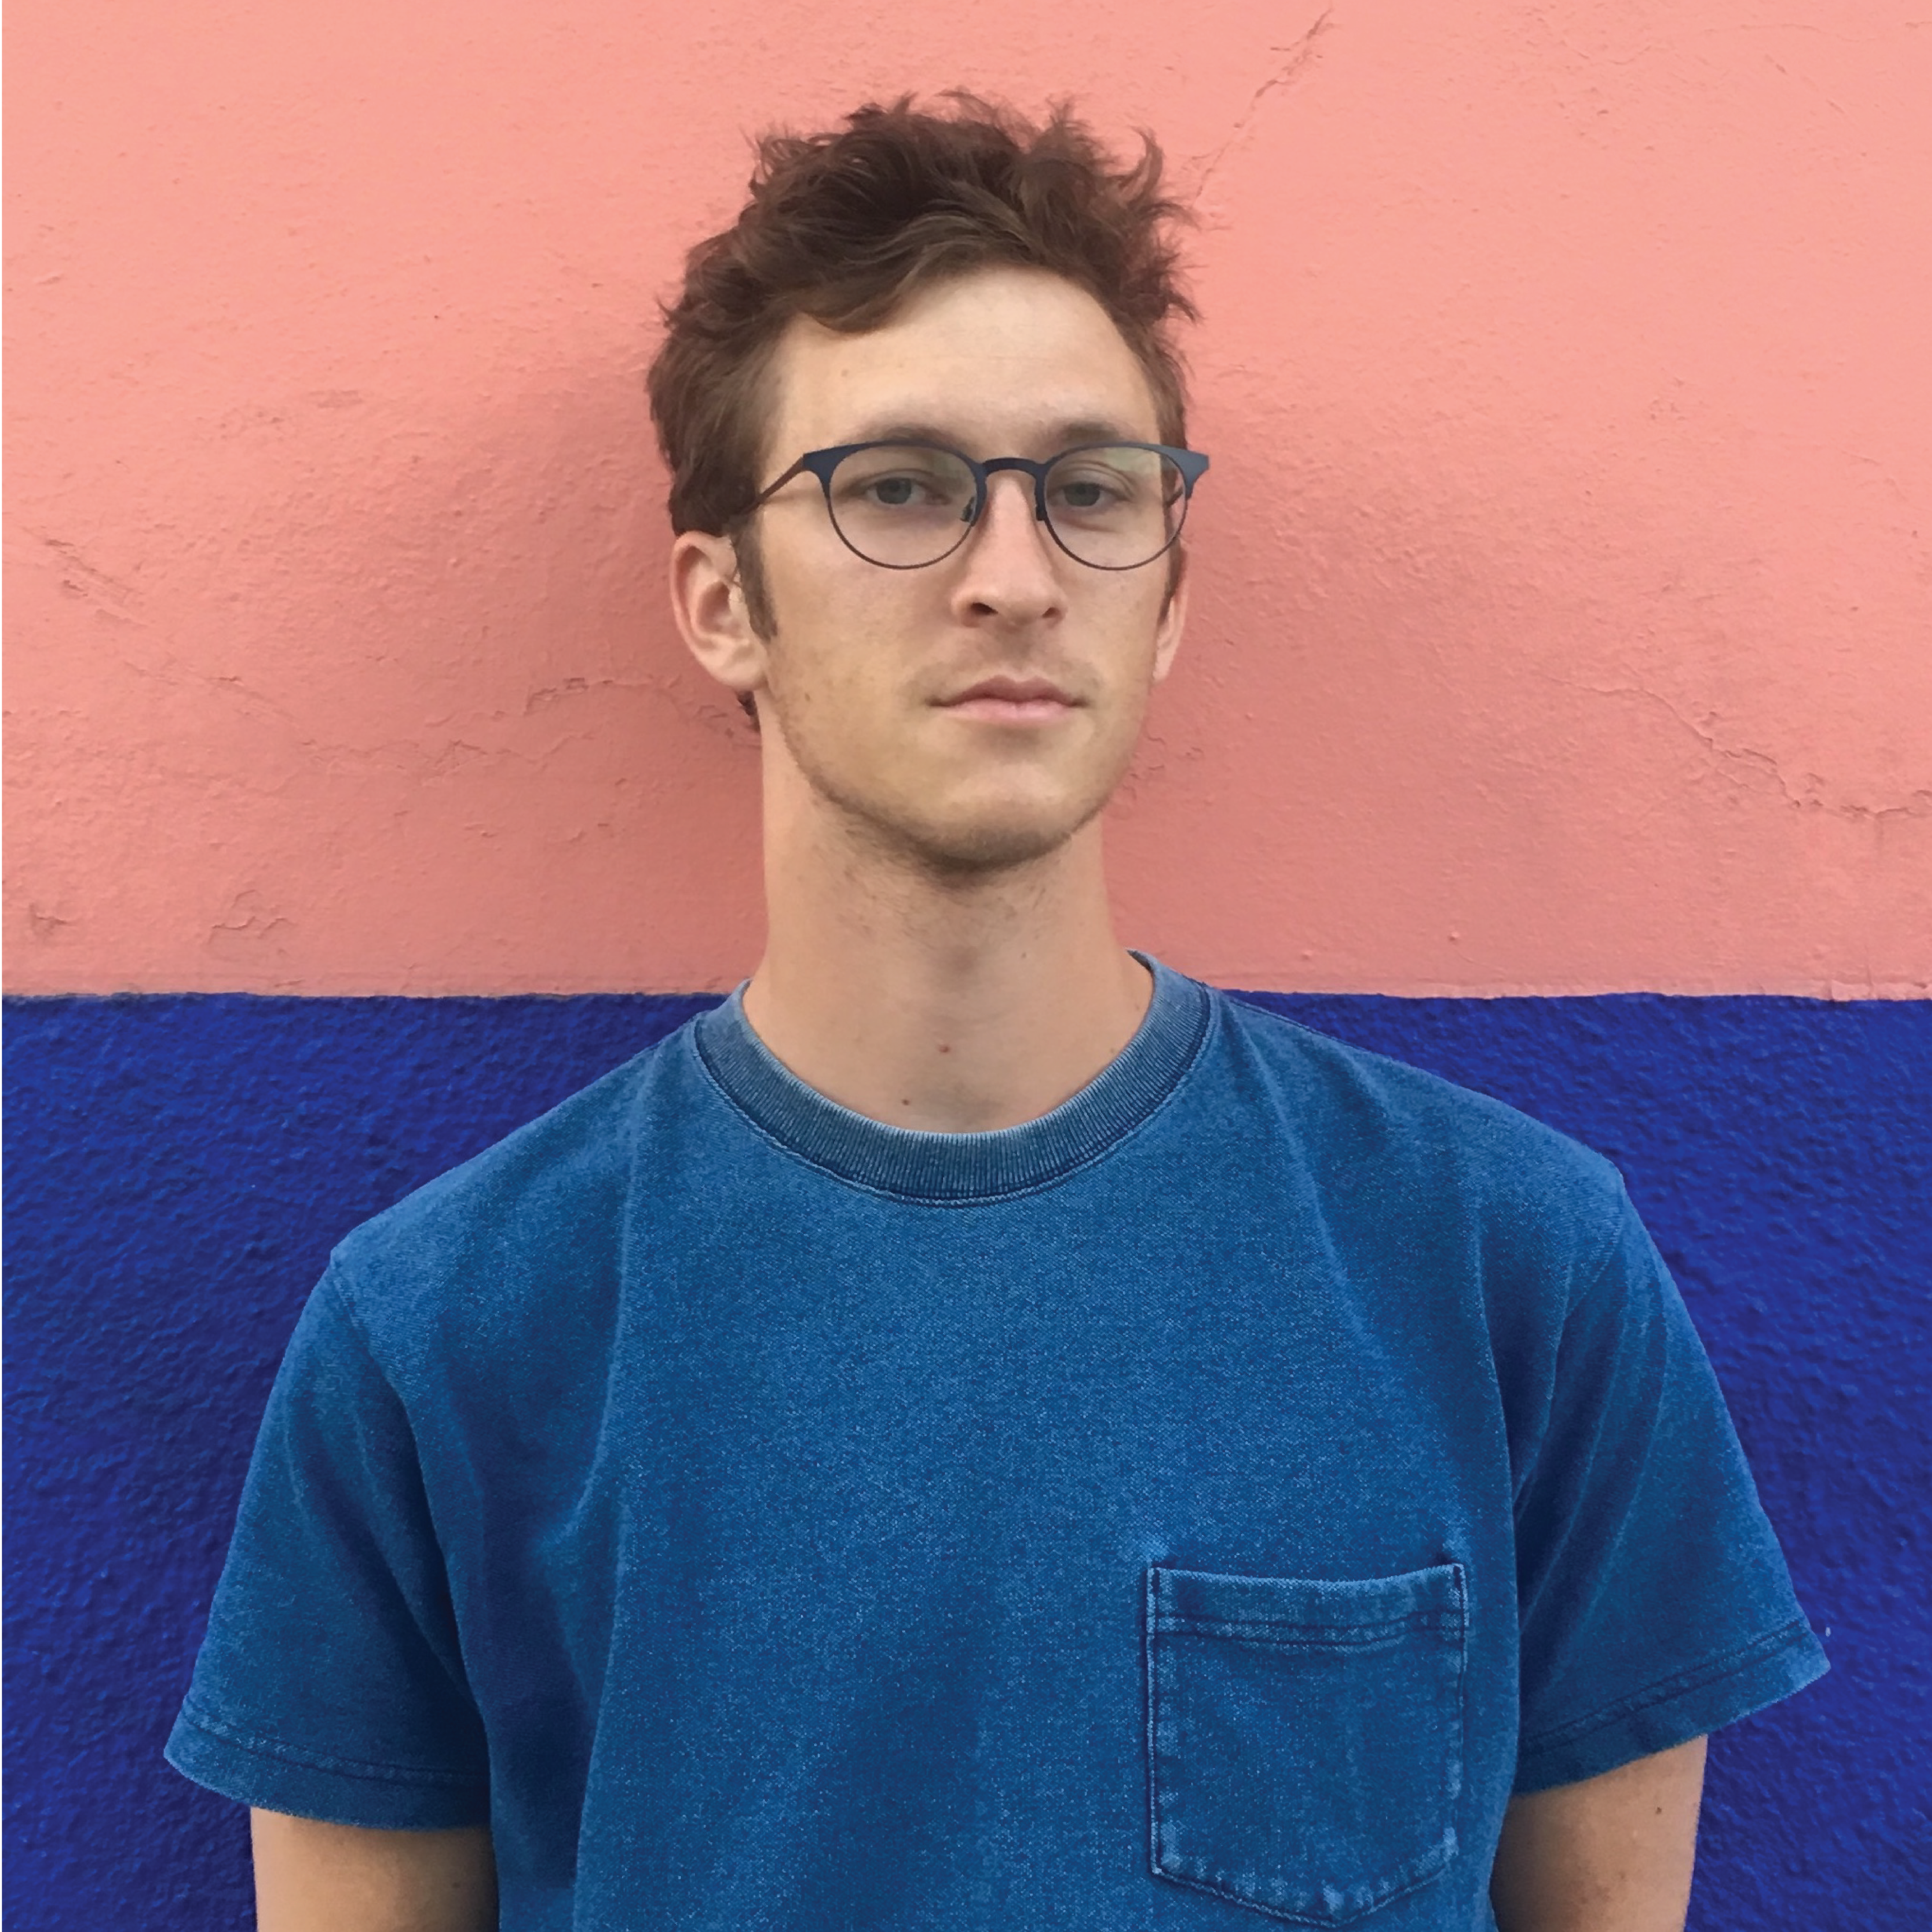 Portrait of Galen, a white man in his 20s with glasses and messy, short, brown hair. He is wearing a blue t-shirt and standing in front of a wall which is painted half blue and half pink.